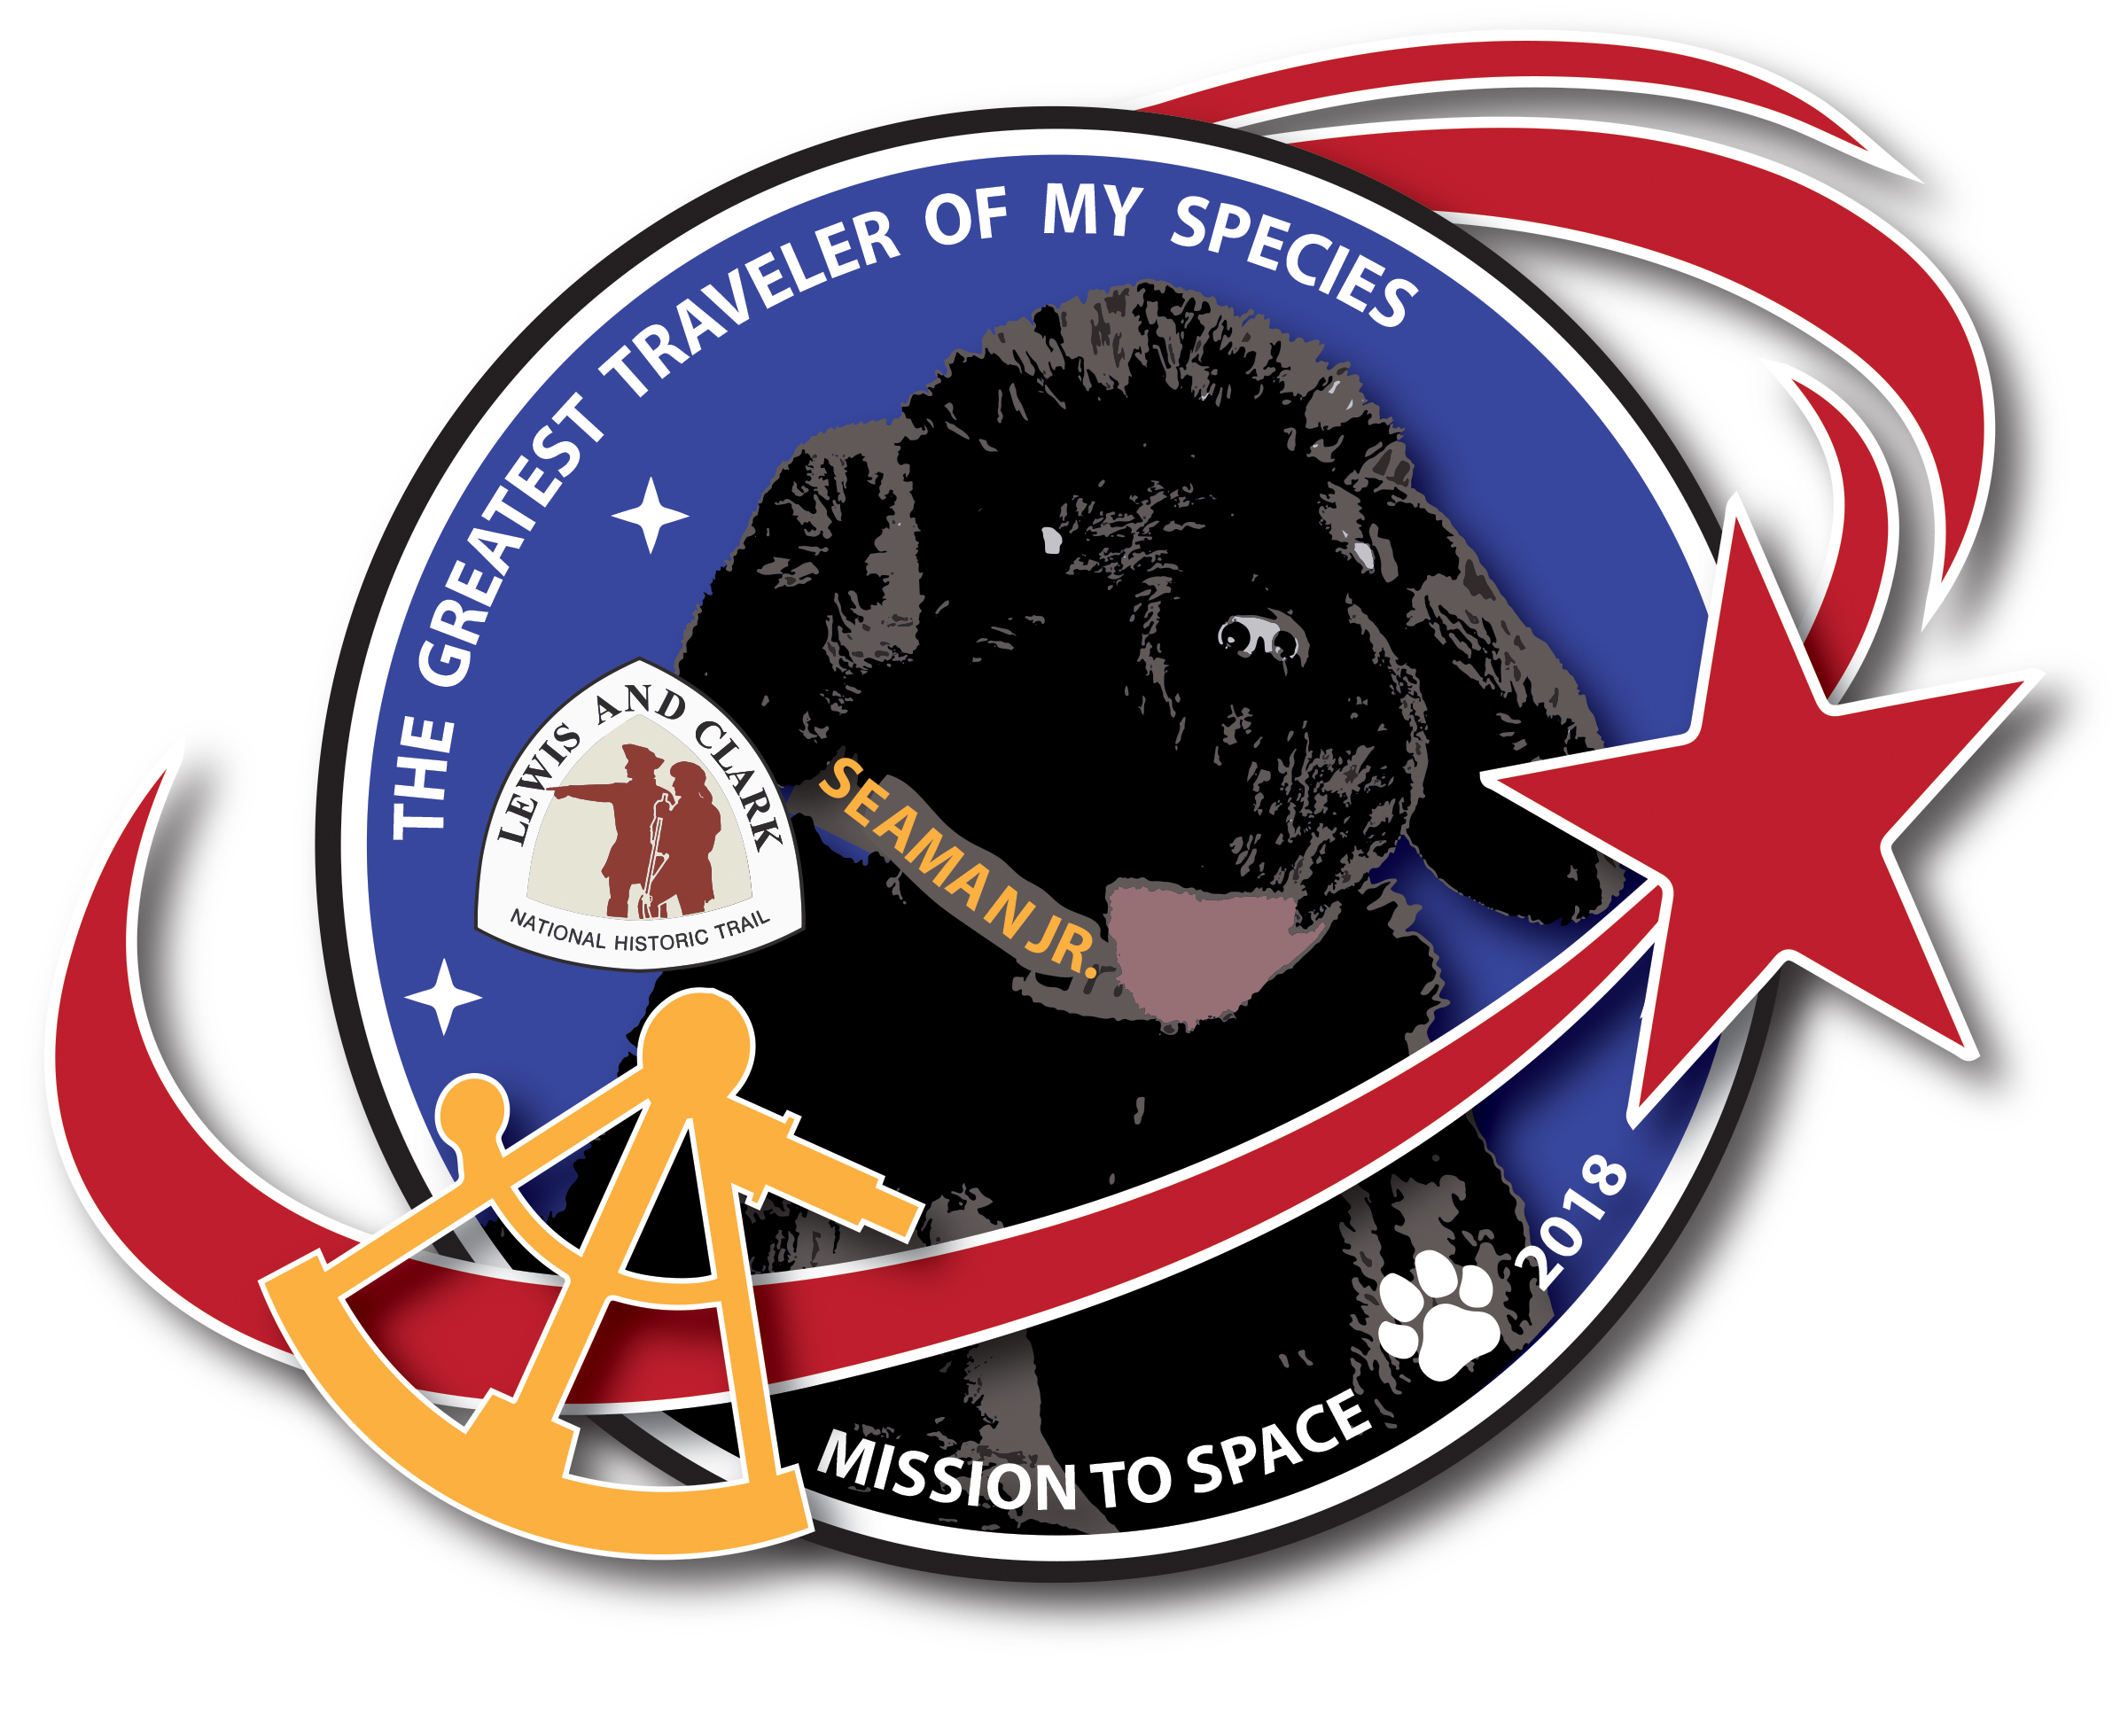 toy dog in logo for space flight